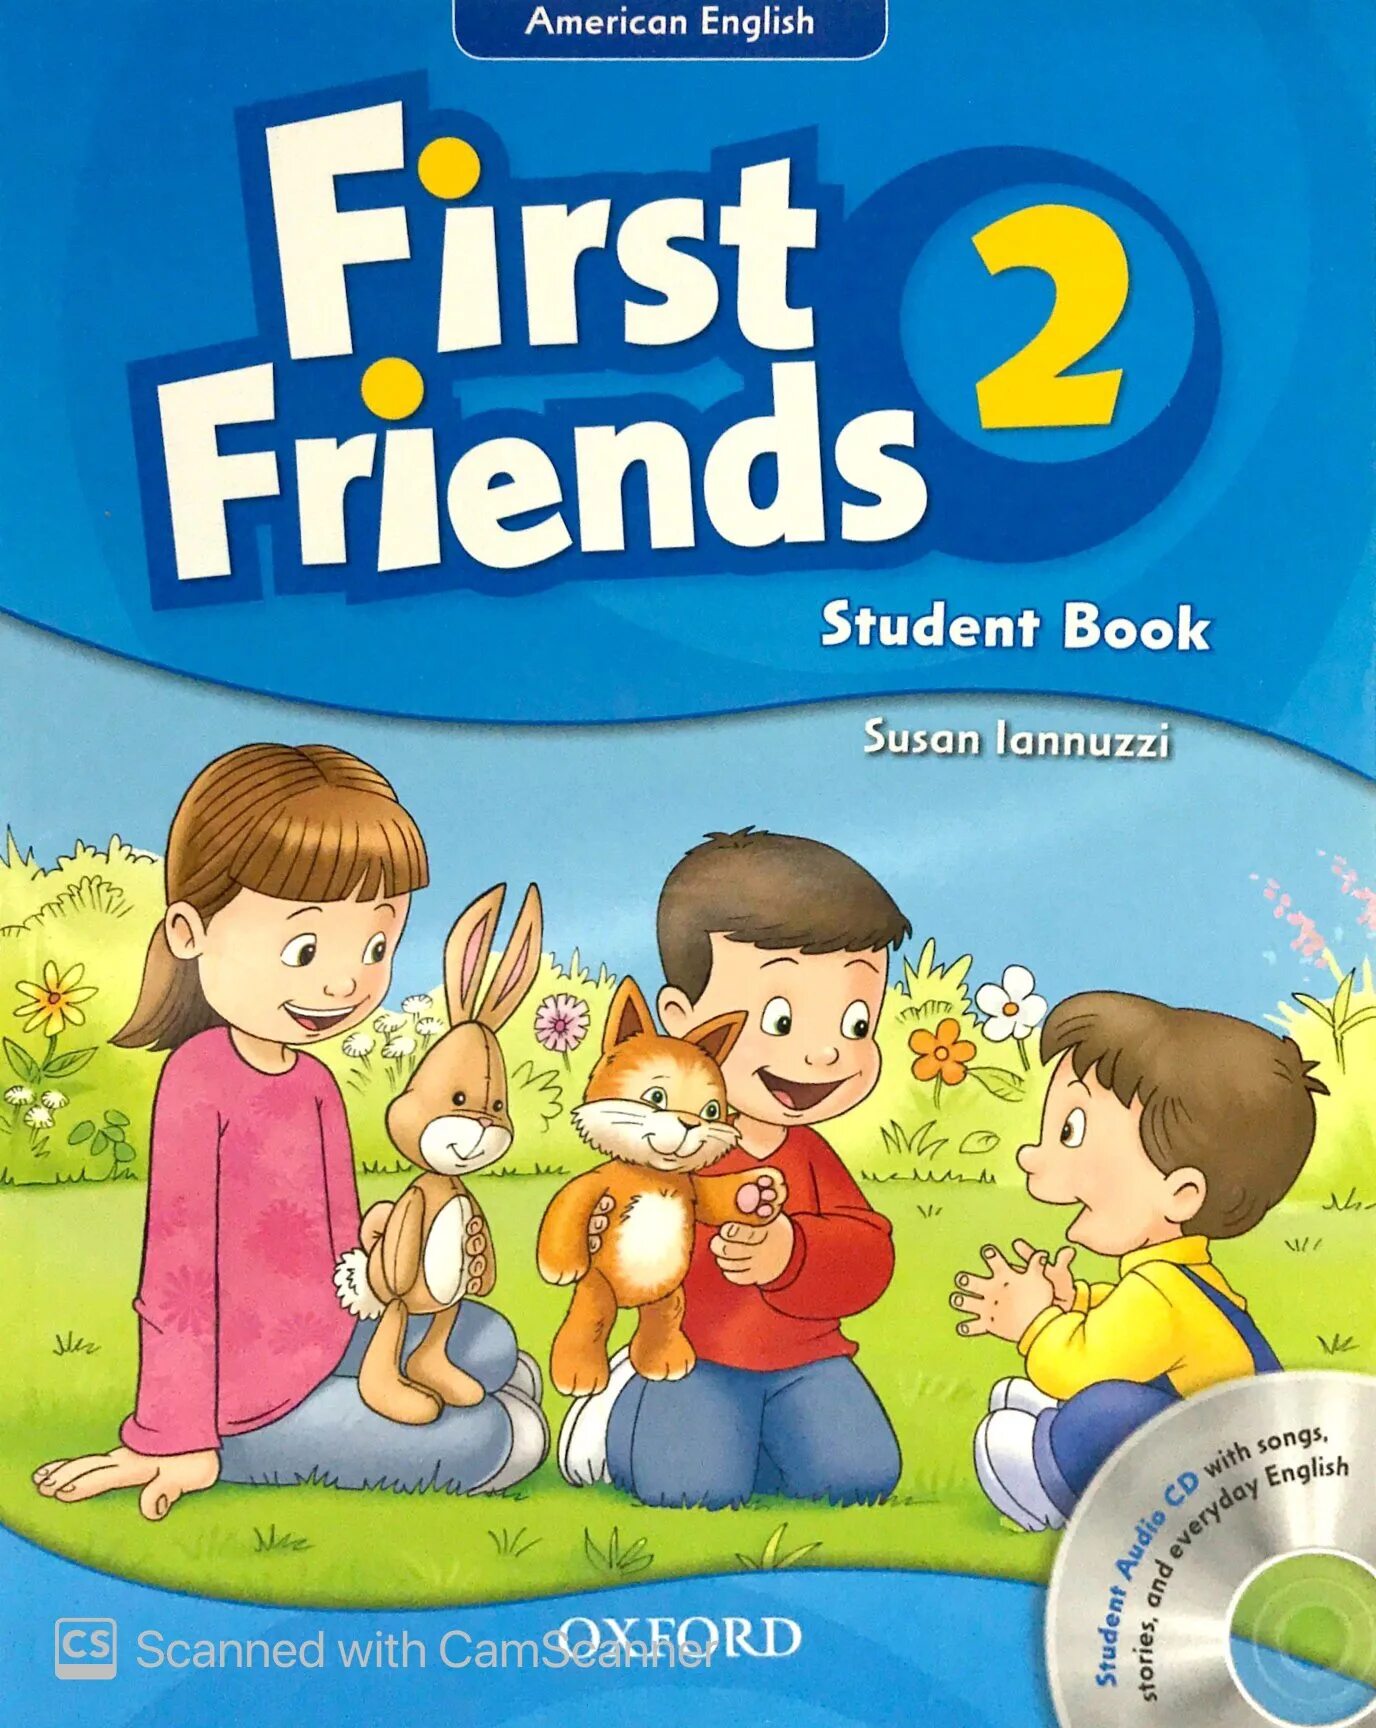 Family student book. English for children книга. English first книги. Английский pupils book Oxford. First friends 2.